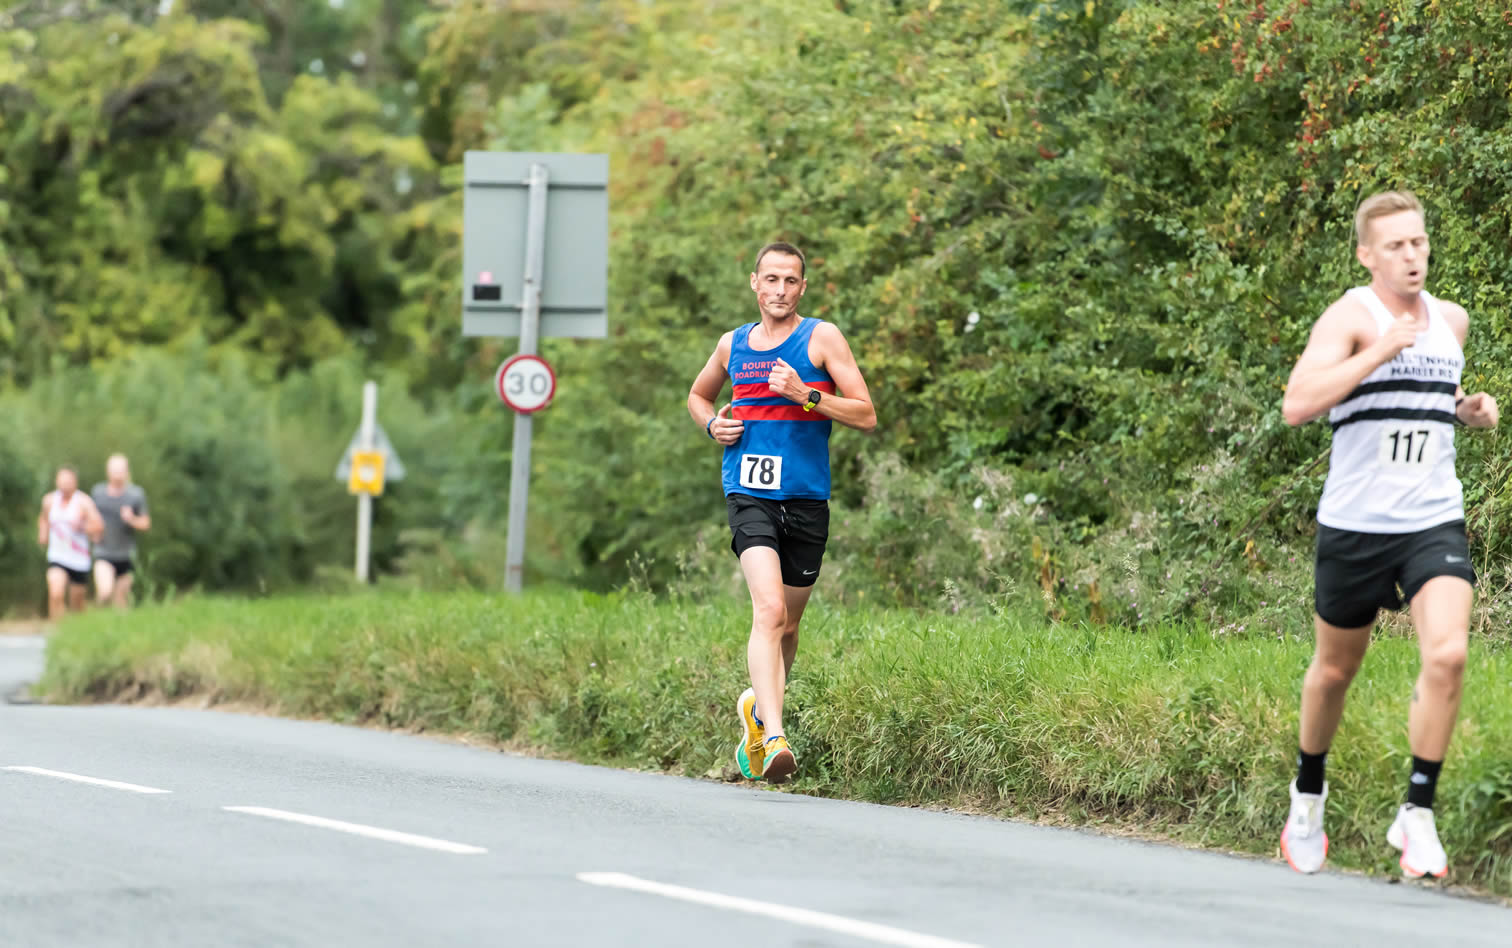 Bourton's Darren Long at Haresfield 5k, 300m to go - 17th August 2022